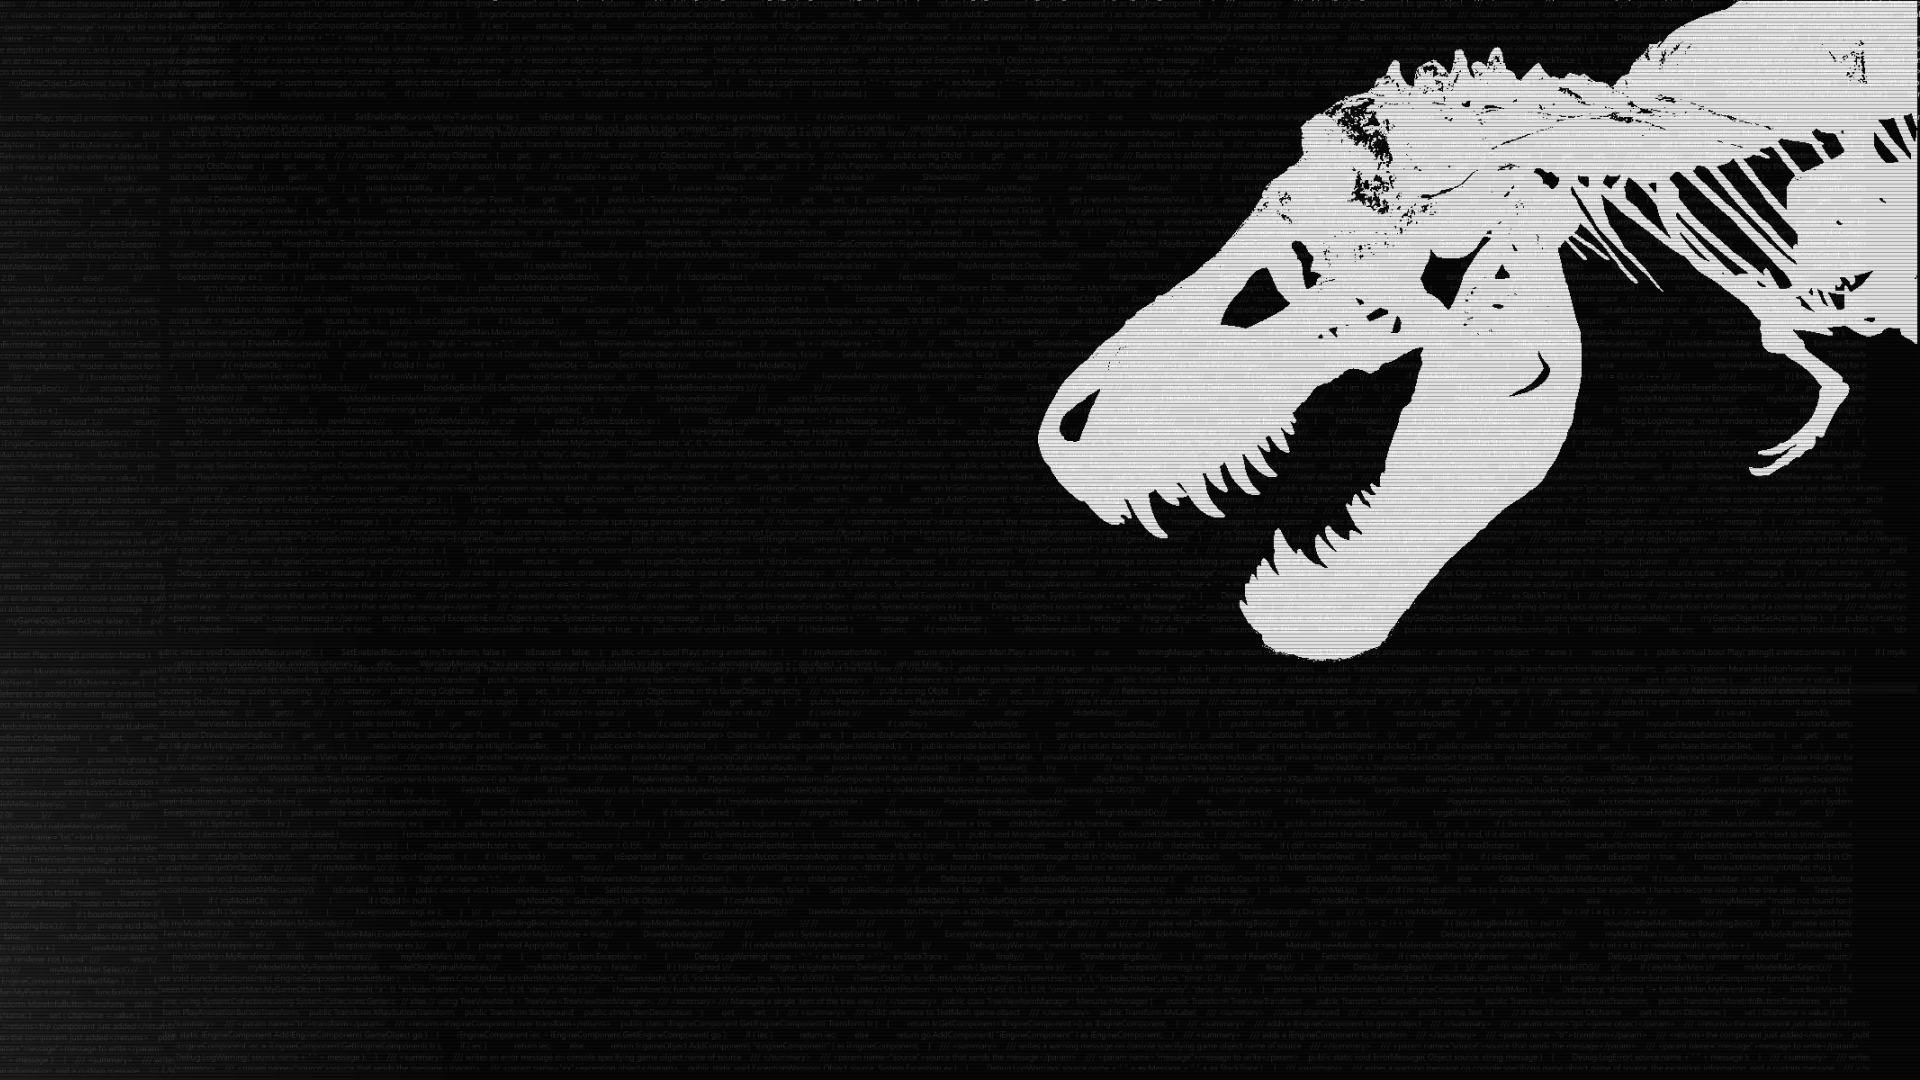 Wallpaper With My T Rex Friend Roger